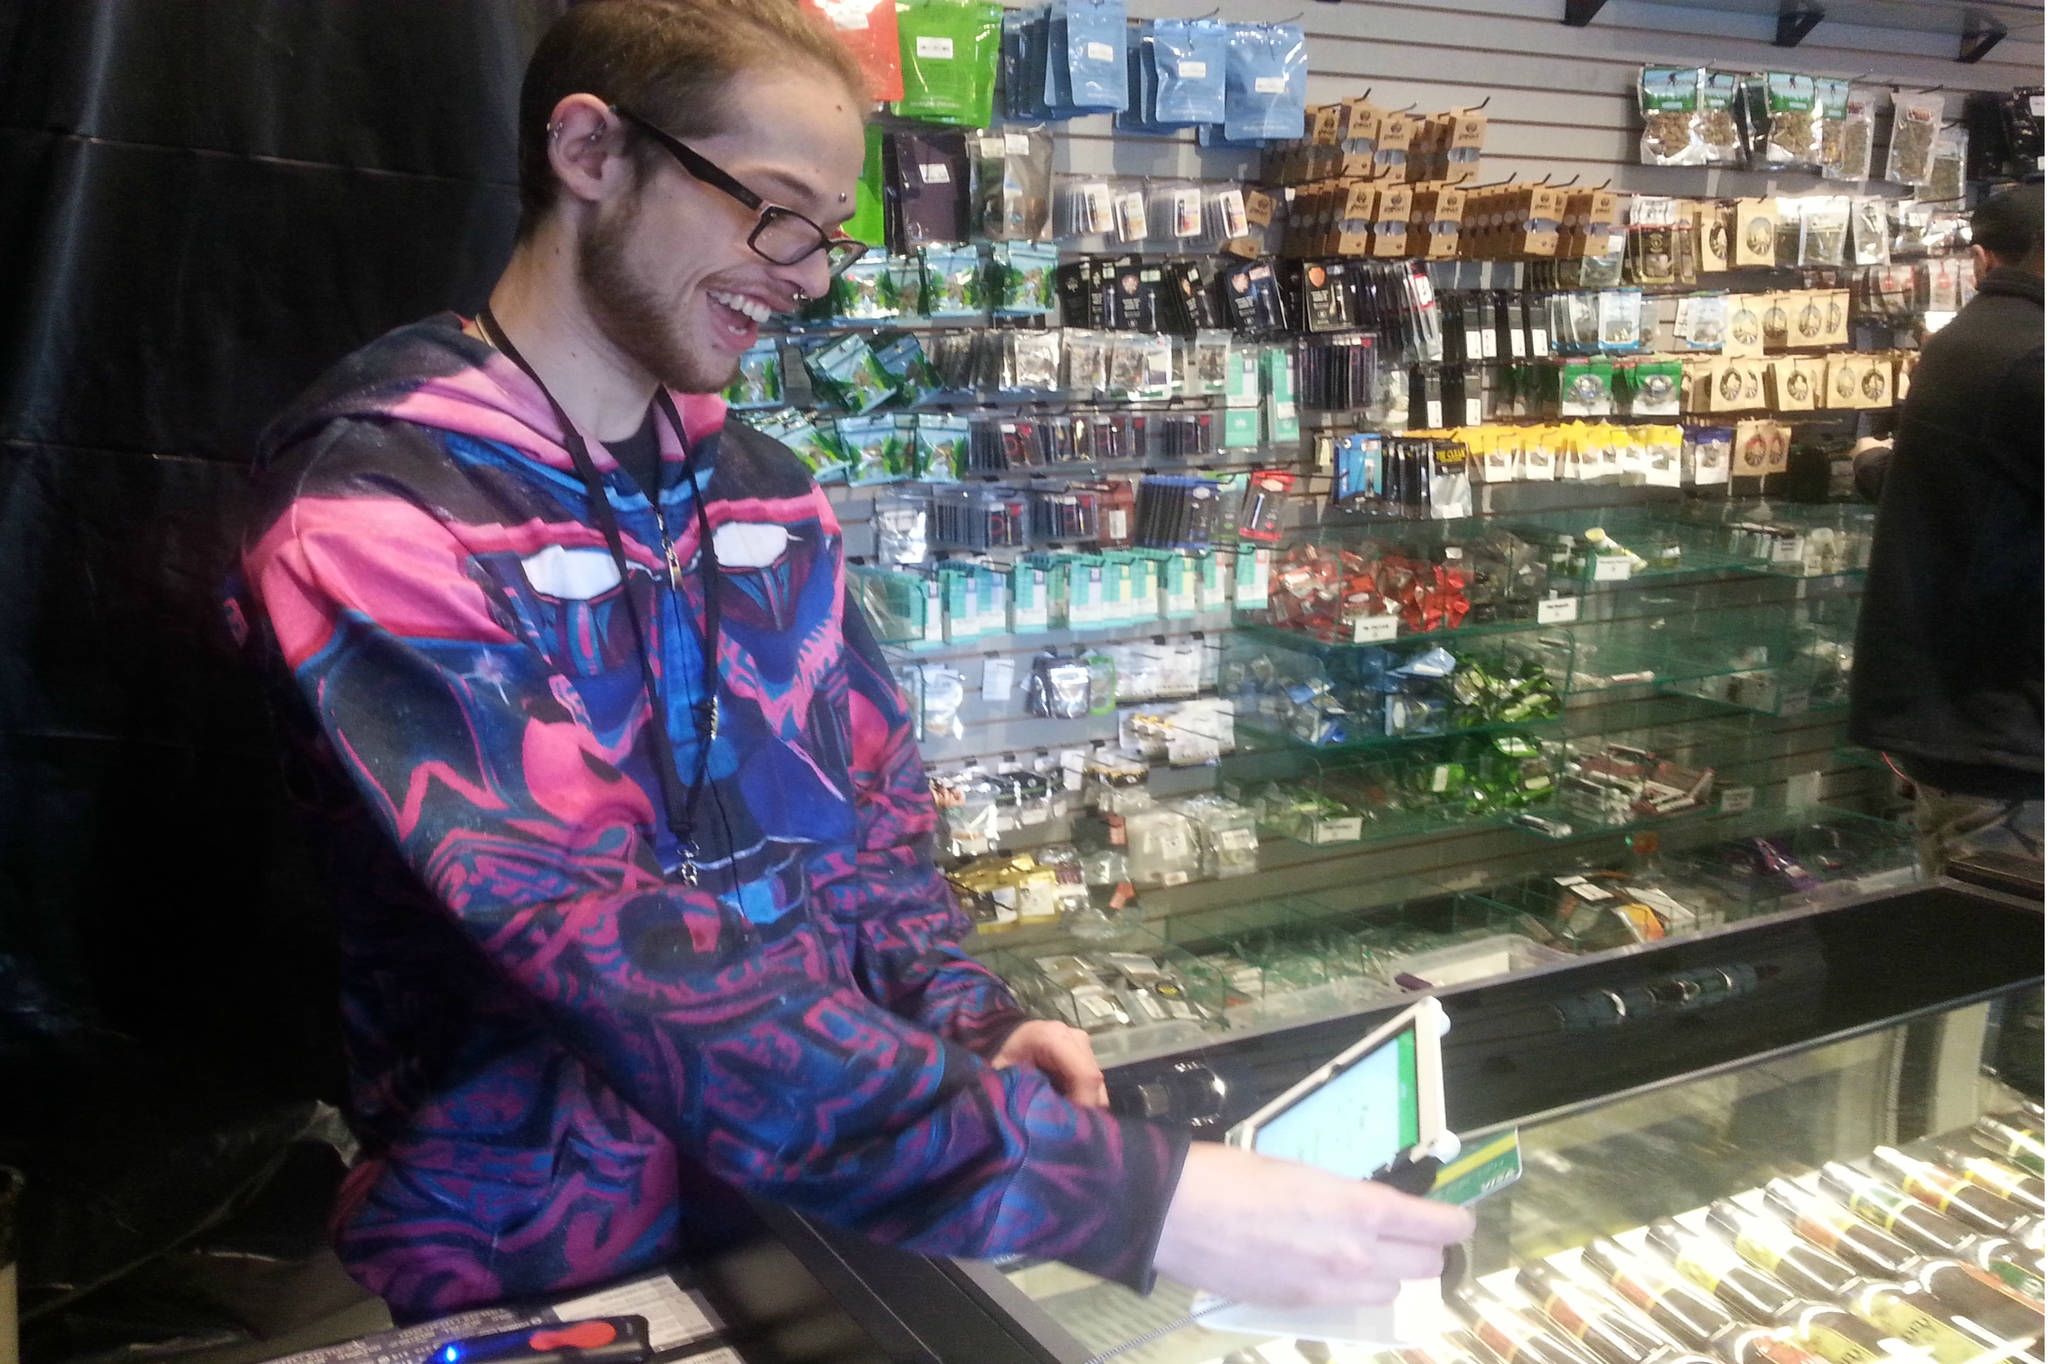 A Pioneer Square Startup Is Using Bitcoin to Let People Buy Pot With a Credit Card